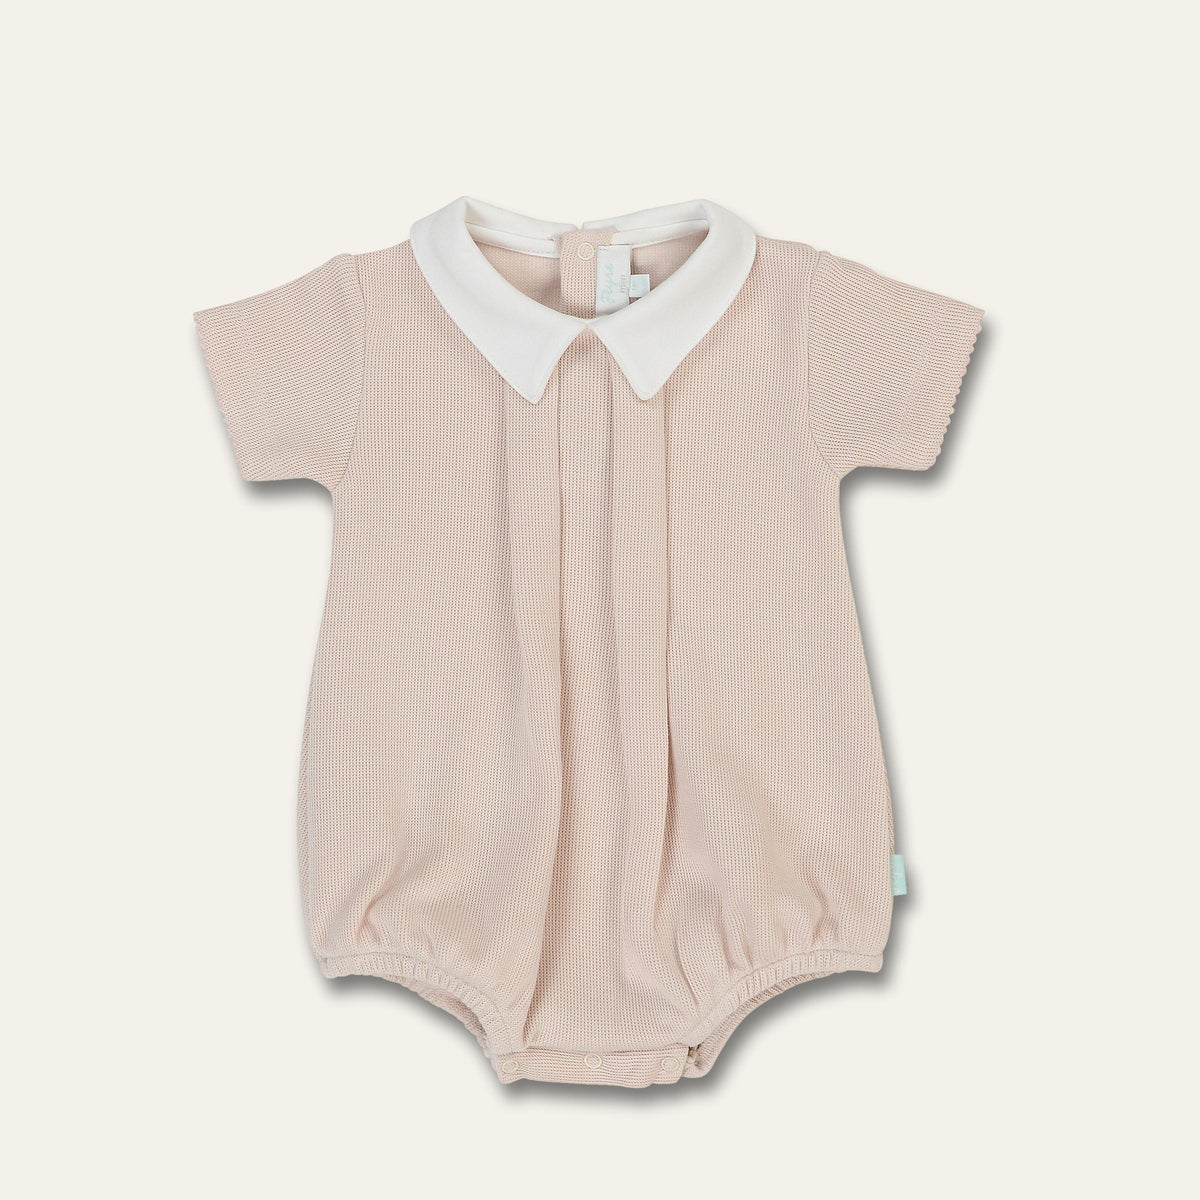 Boy's Bubble Romper with Shirt Collar